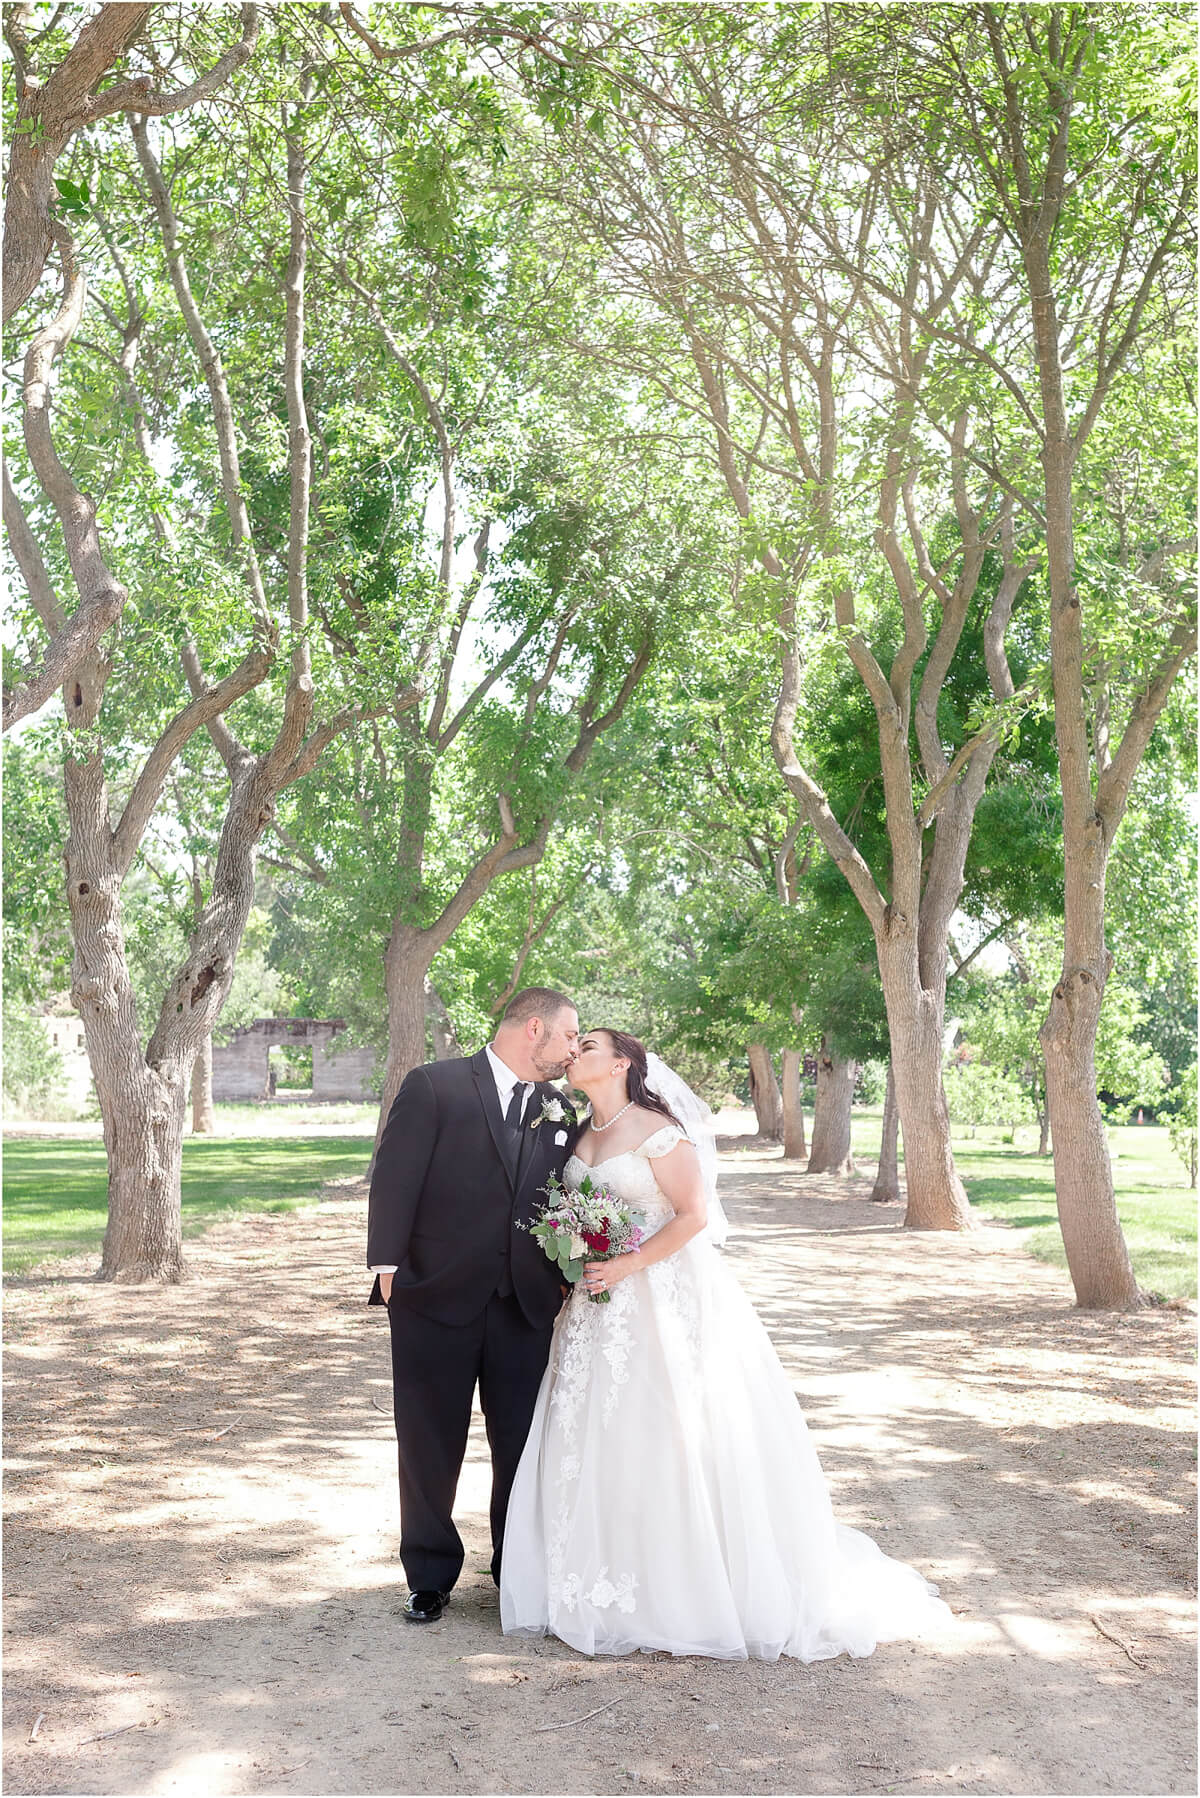 Bride and groom kiss under tree path at Ravenswood summer wedding